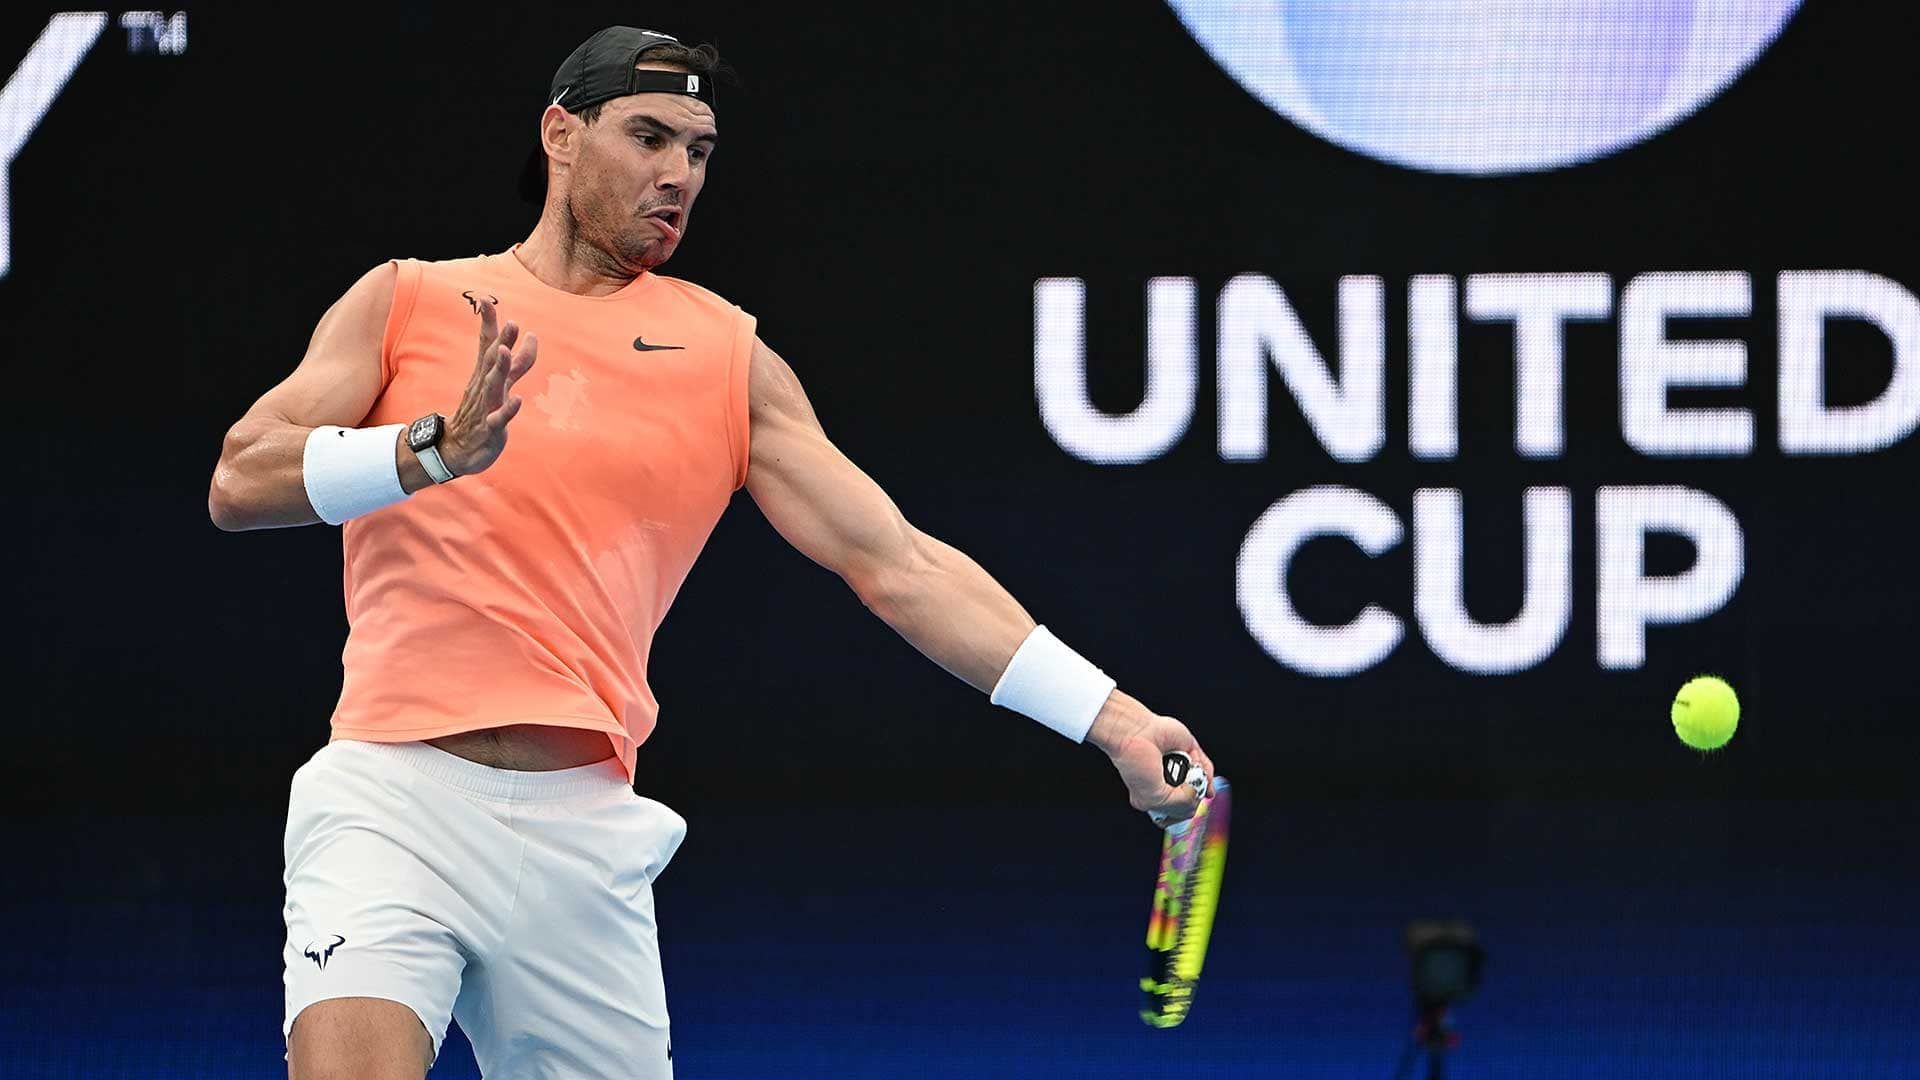 Nadal's wife can't hold back tears after her husband's injury at Australian Open